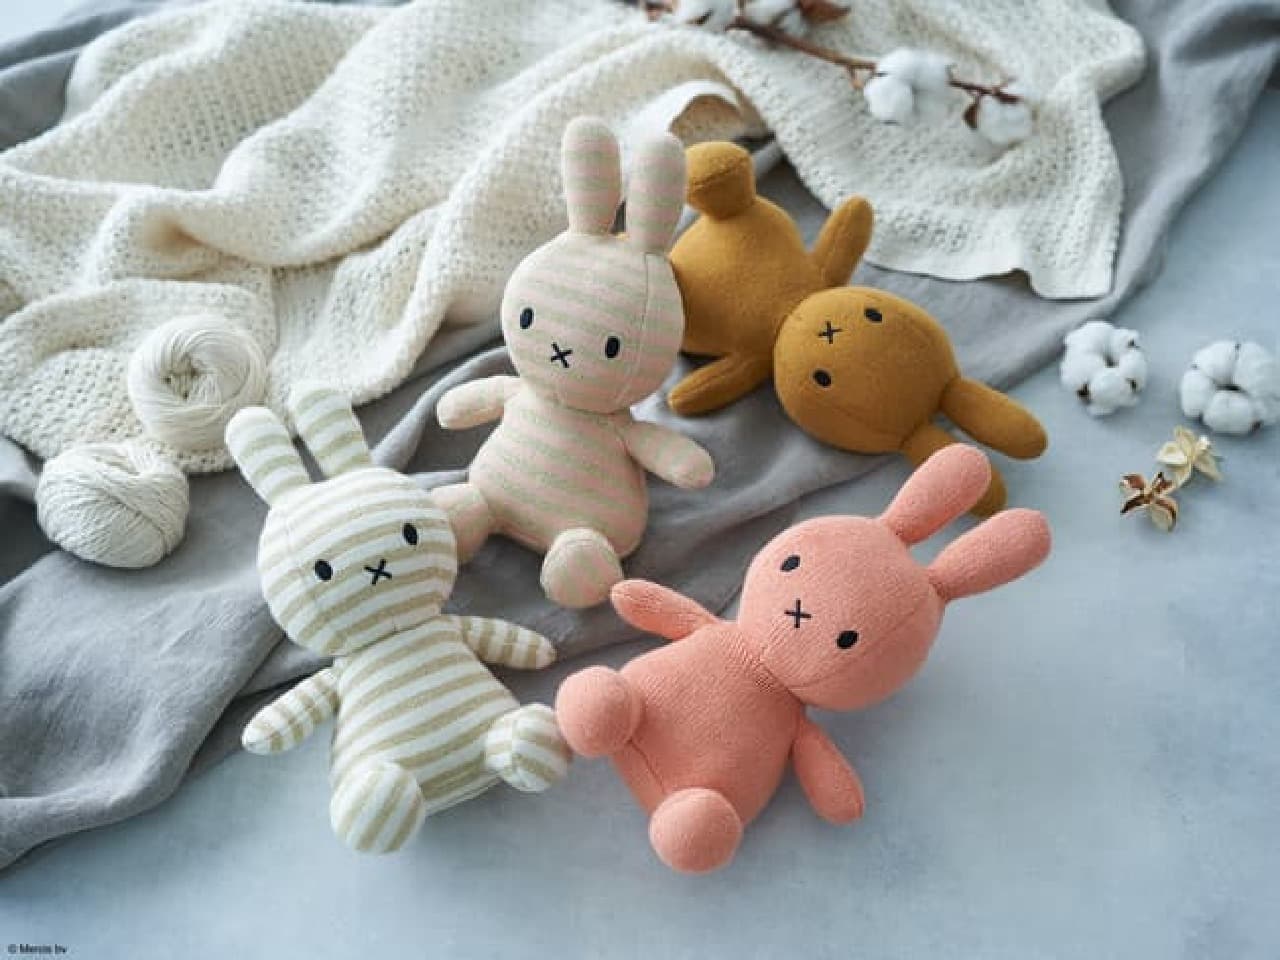 Miffy plush toys made from organic cotton --From "BON TON TOYS" from the Netherlands! Smooth to the touch